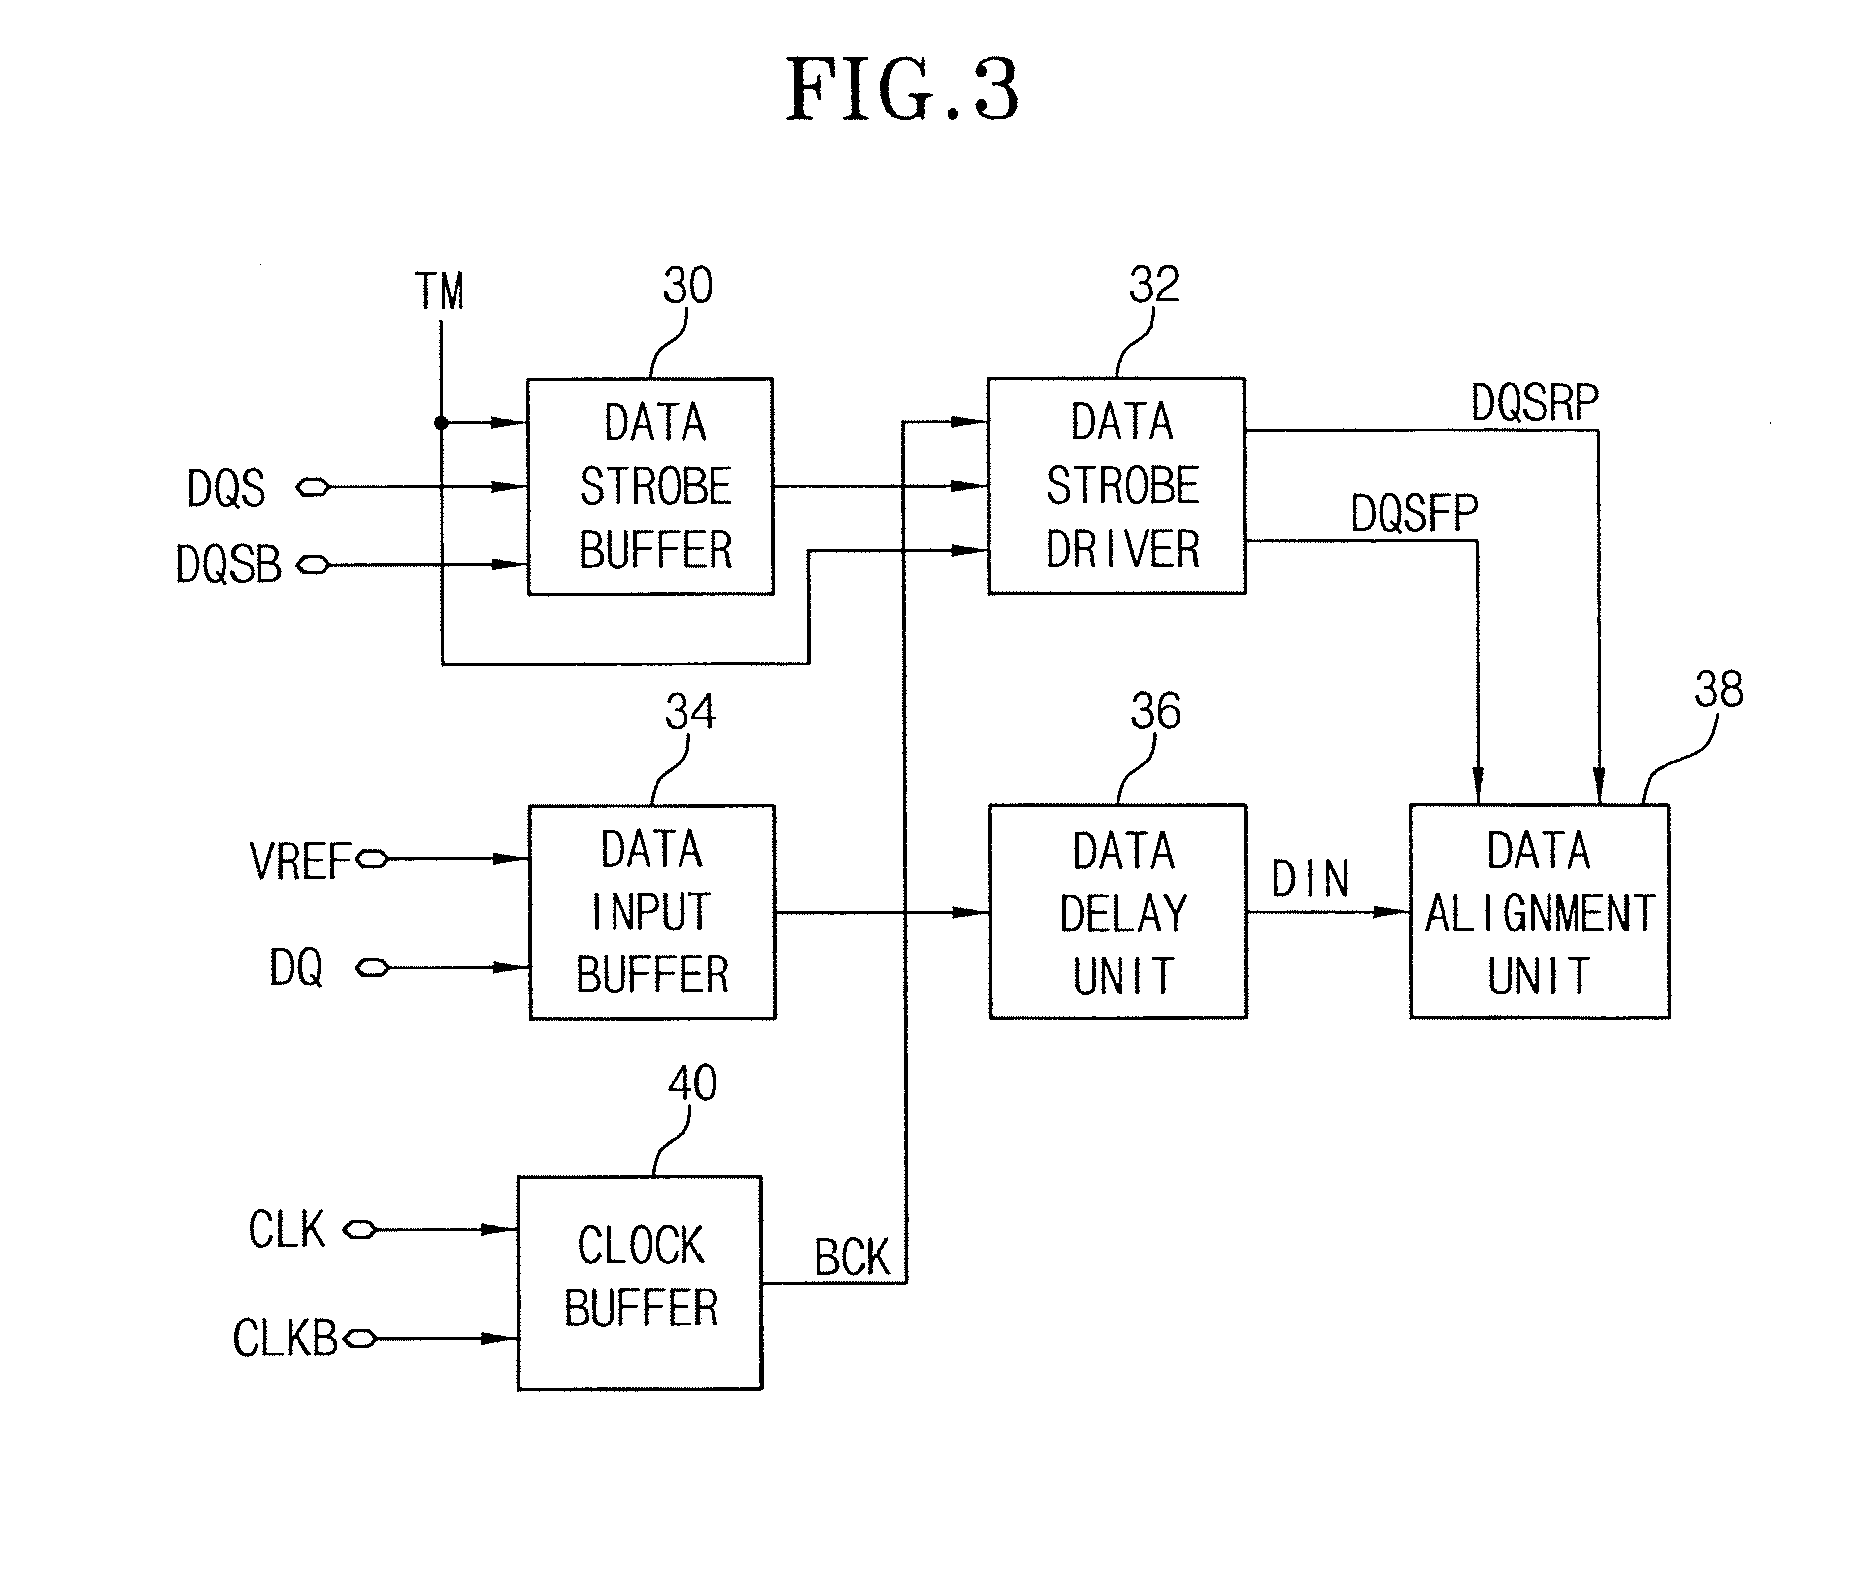 Data input apparatus with improved setup/hold window